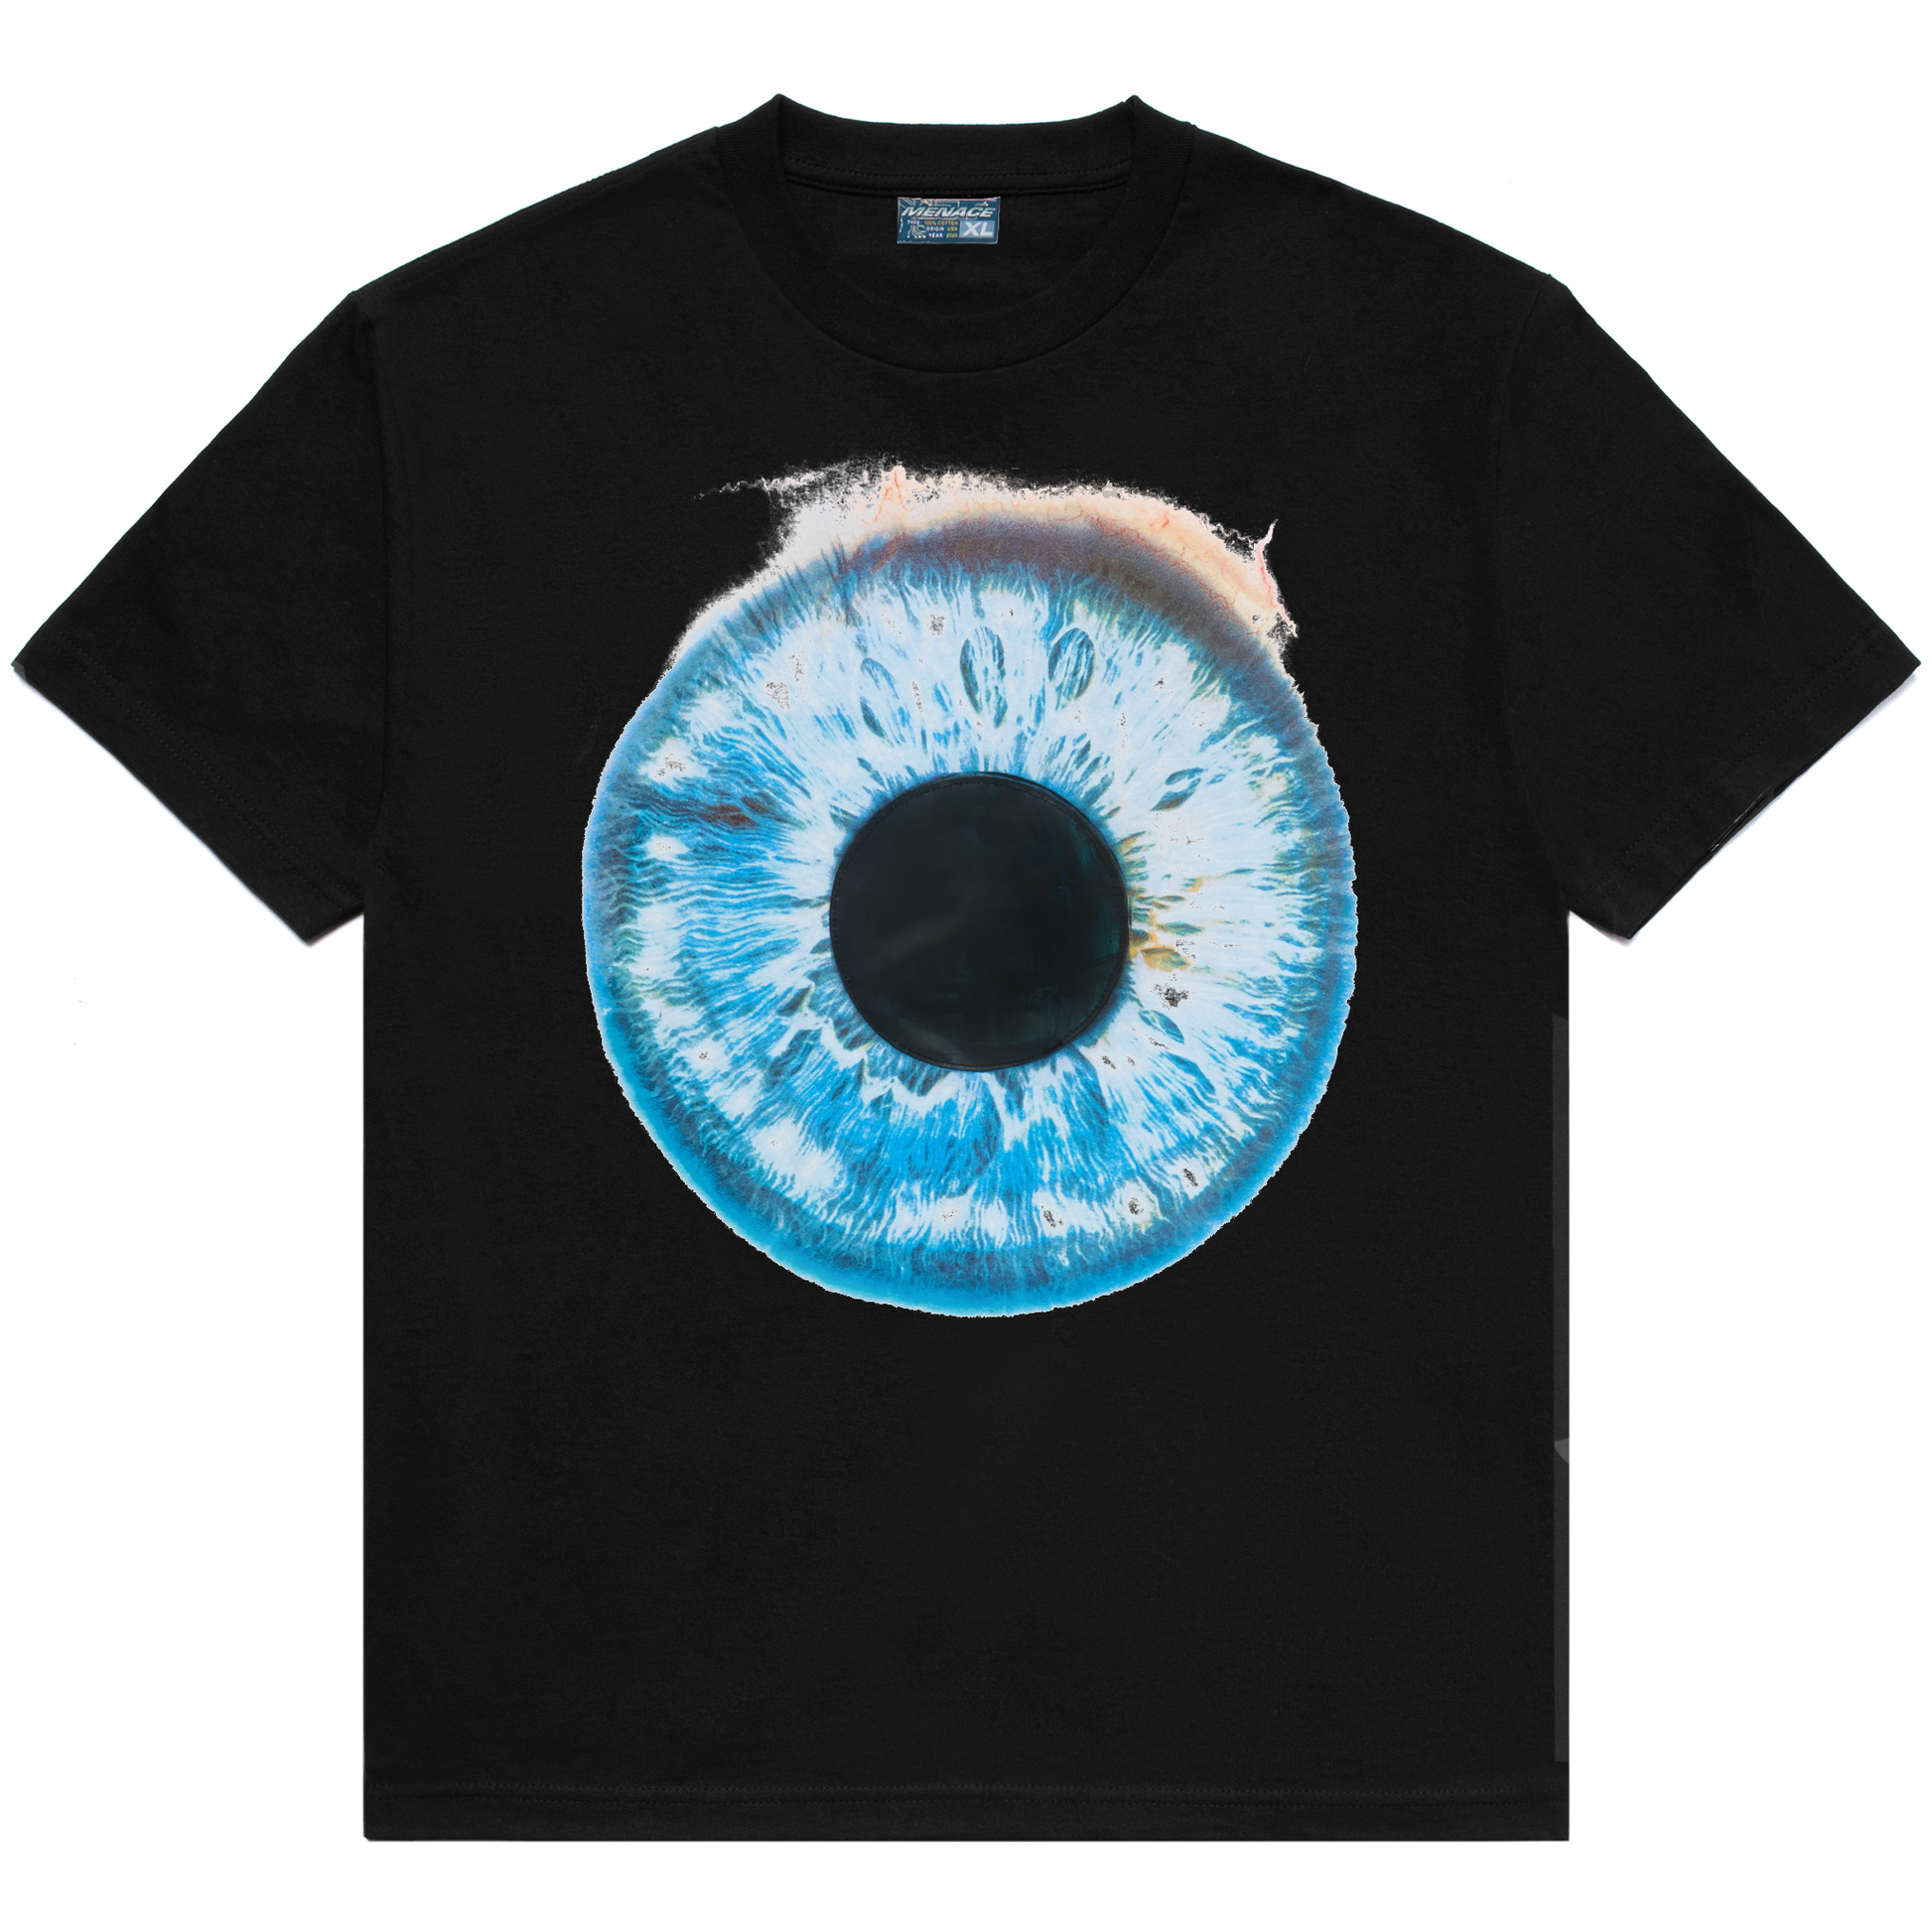 ALL SEEING EYE LENTICULAR PATCH T-SHIRT by MENACE